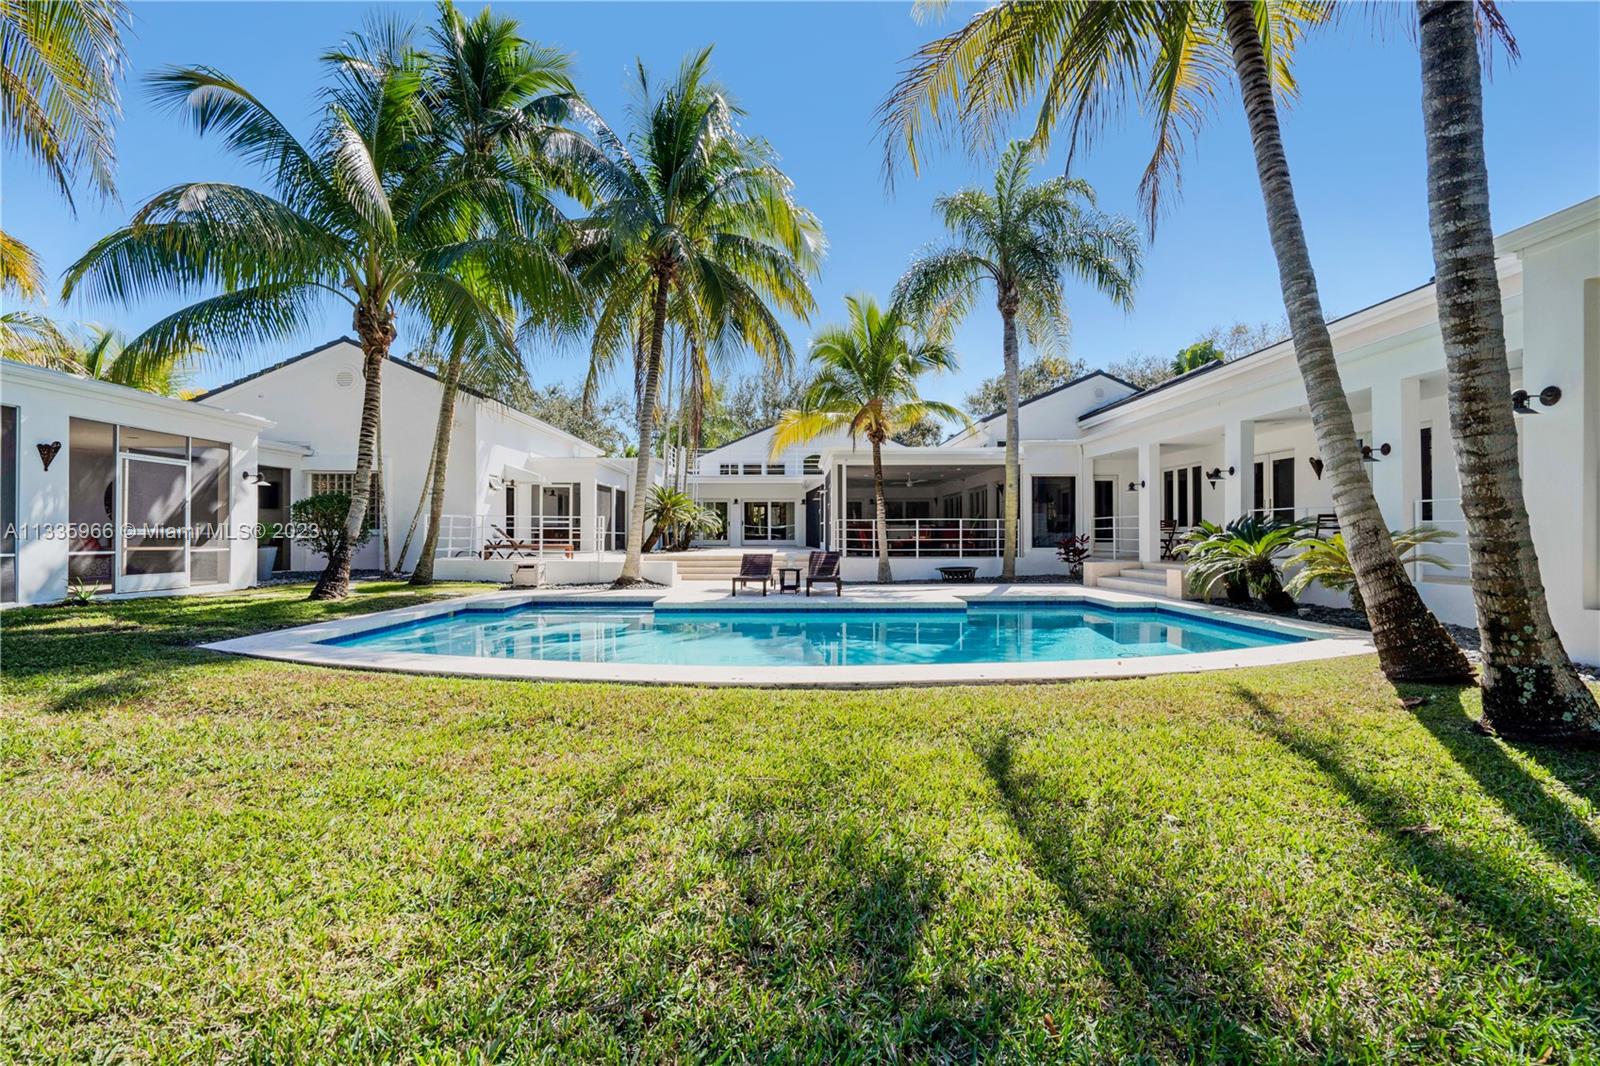 This immaculate contemporary resort-style home sits on a deep acre lot in the heart of Pinecrest. It is located in a low traffic street and was completely remodeled and updated by renowned architect David Johnson.
One of Pinecrest's few large one-story homes, it has 12ft high ceilings throughout most of the house.The 6 bedroom plus large and bright office space home is perfect for work and entertainment, with a full range of amenities including a professionally designed movie theater, a basketball court, a volleyball court, a dedicated ping pong area, a large pool, an oversized tree house and multiple outdoor sitting areas for alfresco living and dining.
A true family paradise!